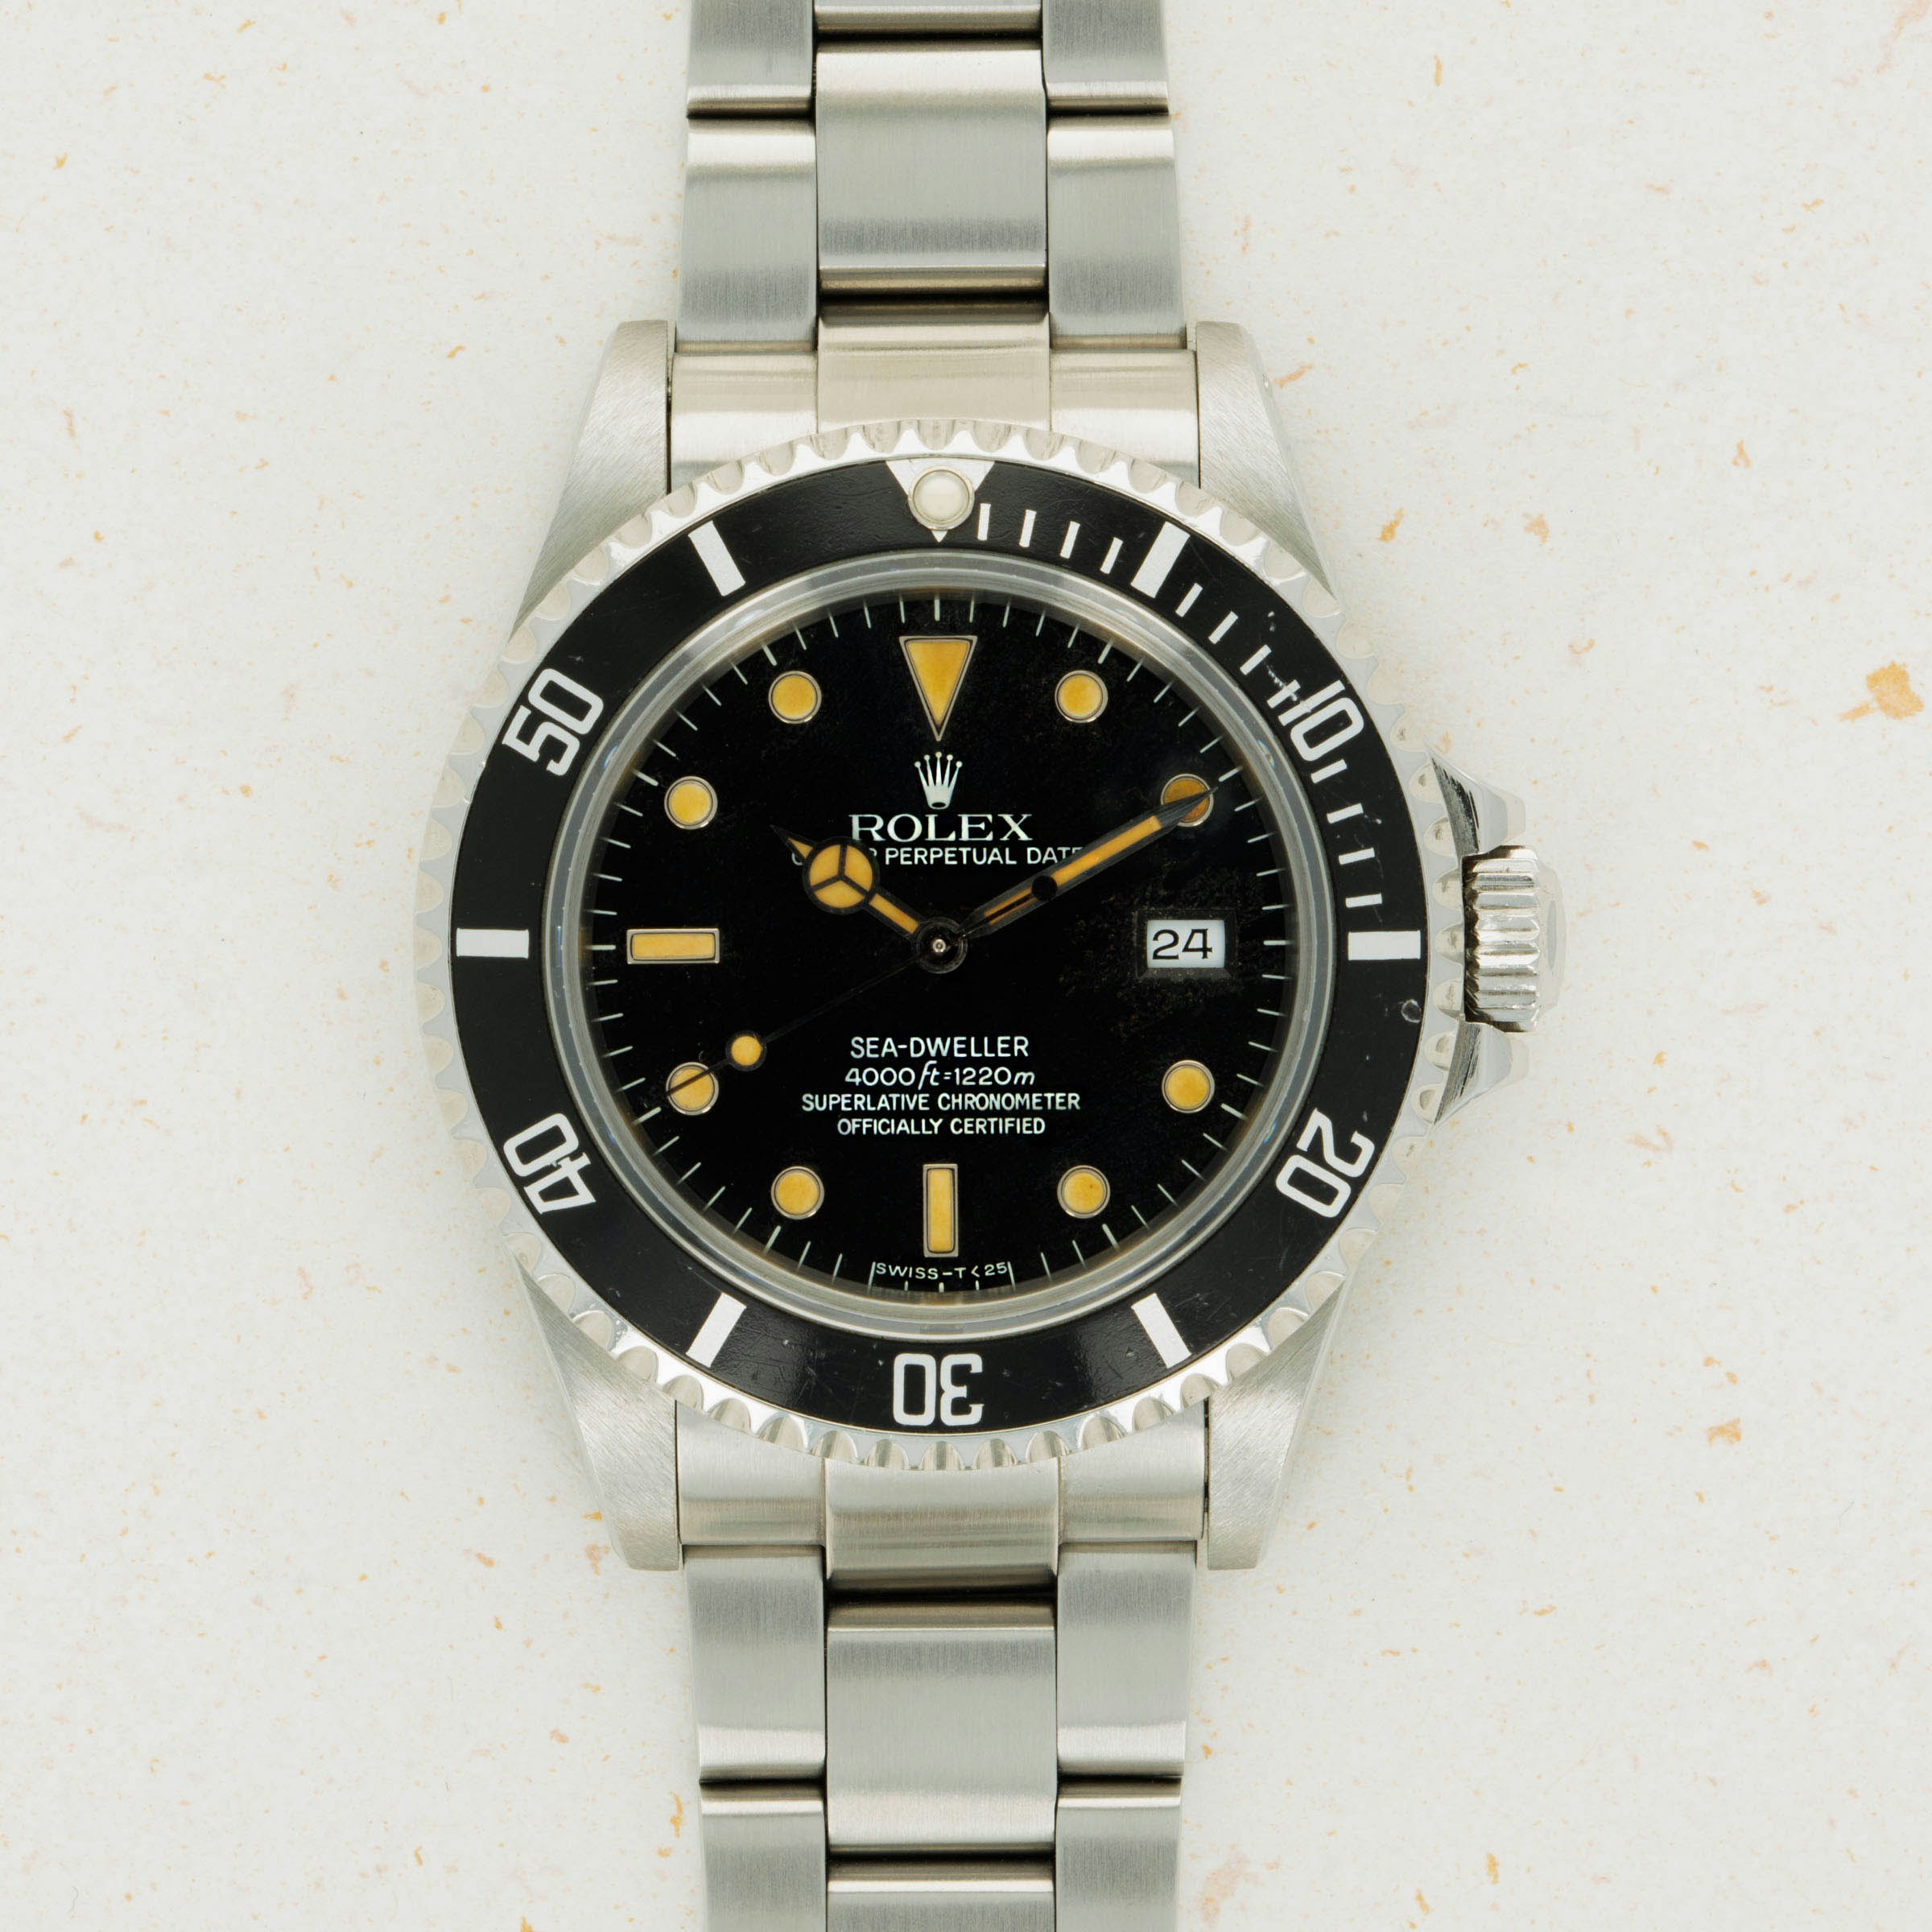 Thumbnail for Rolex Sea-Dweller 16660 Glossy Dial